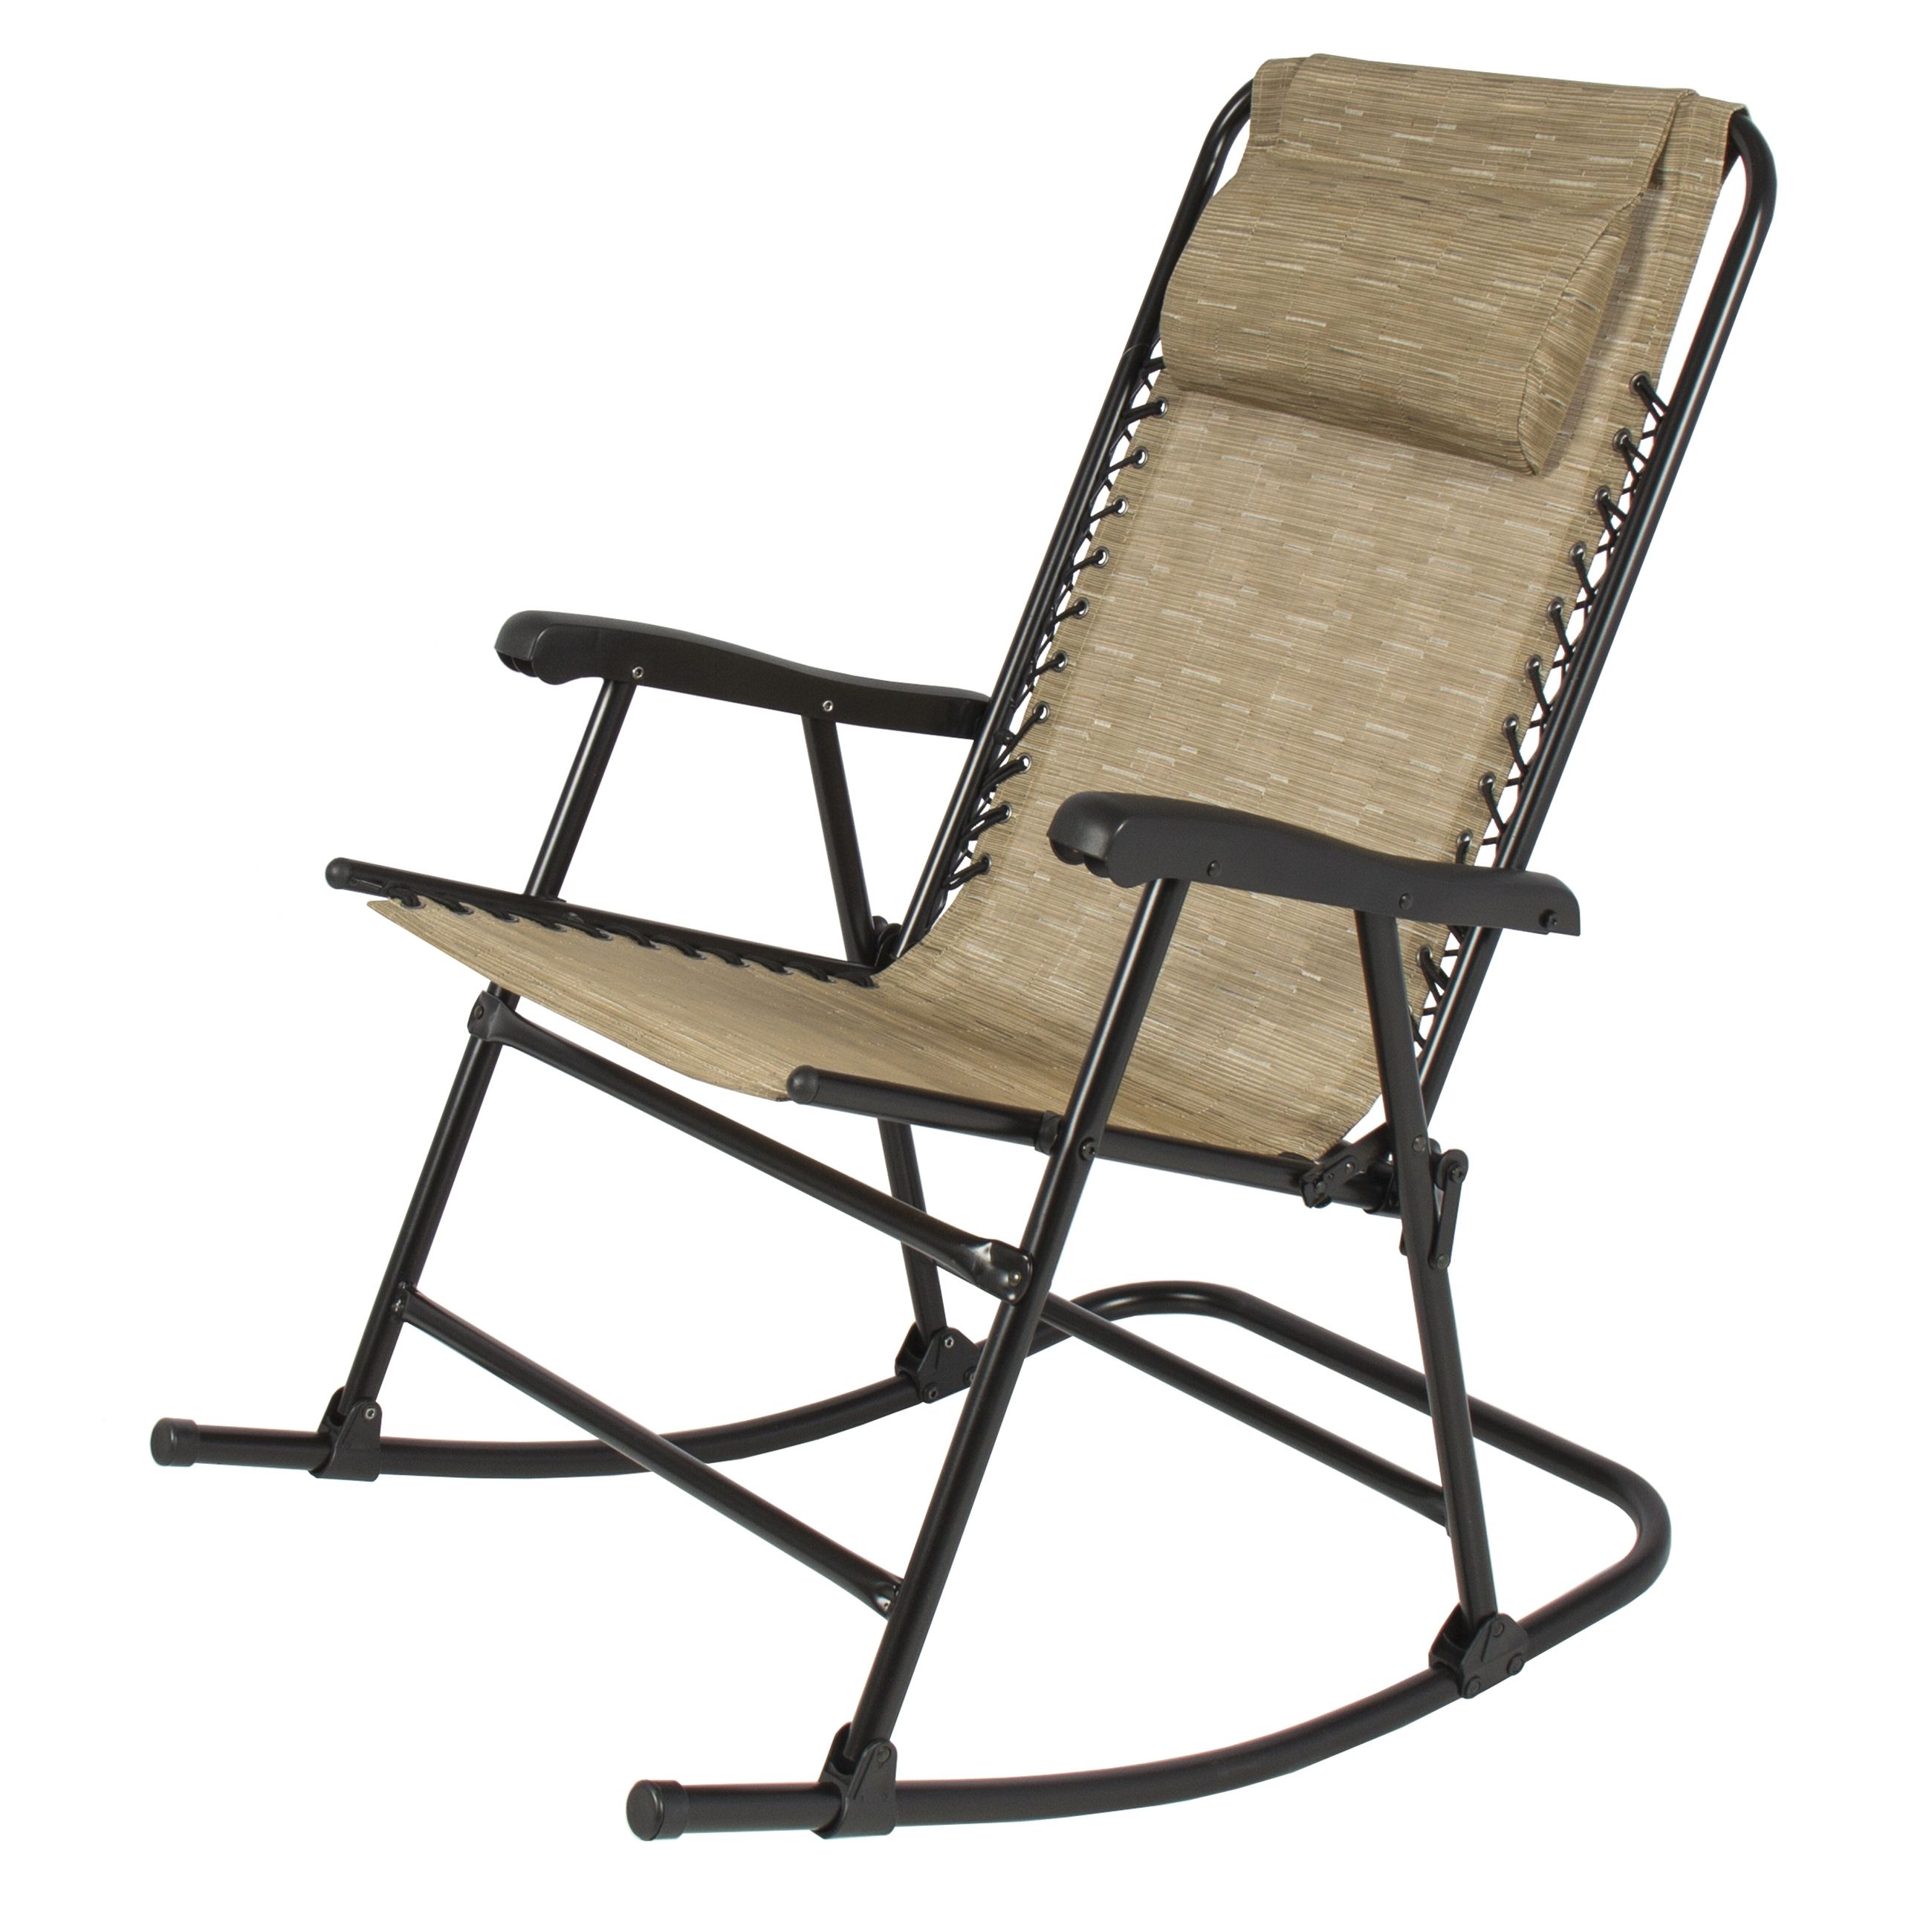 Widely Used Folding Rocking Chair Foldable Rocker Outdoor Patio Furniture Beige Inside Walmart Rocking Chairs (View 1 of 20)